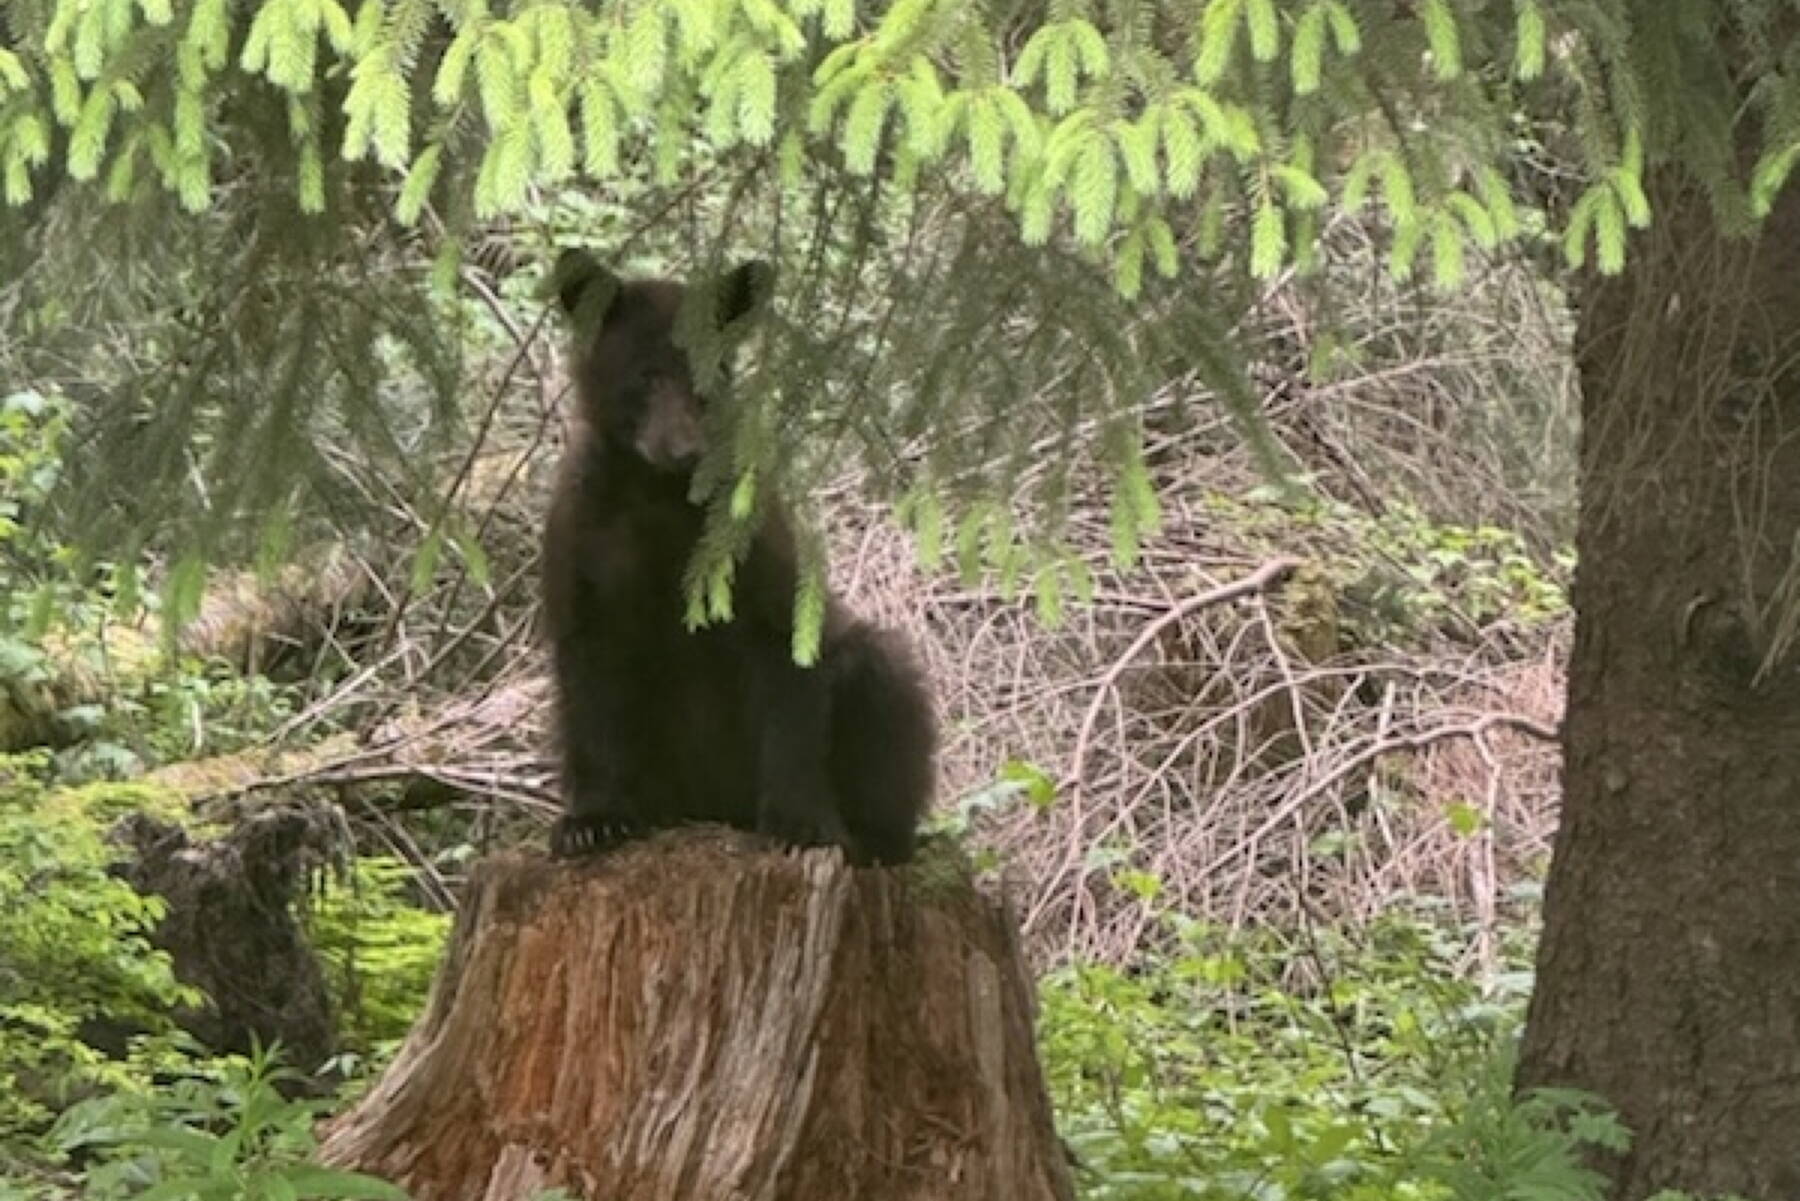 A yearling black bear waits for its mother to return. Most likely she won’t. This time of year juvenile bears are separated, sometimes forcibly, by their mothers as families break up during mating season. (Photo courtesy K. McGuire)